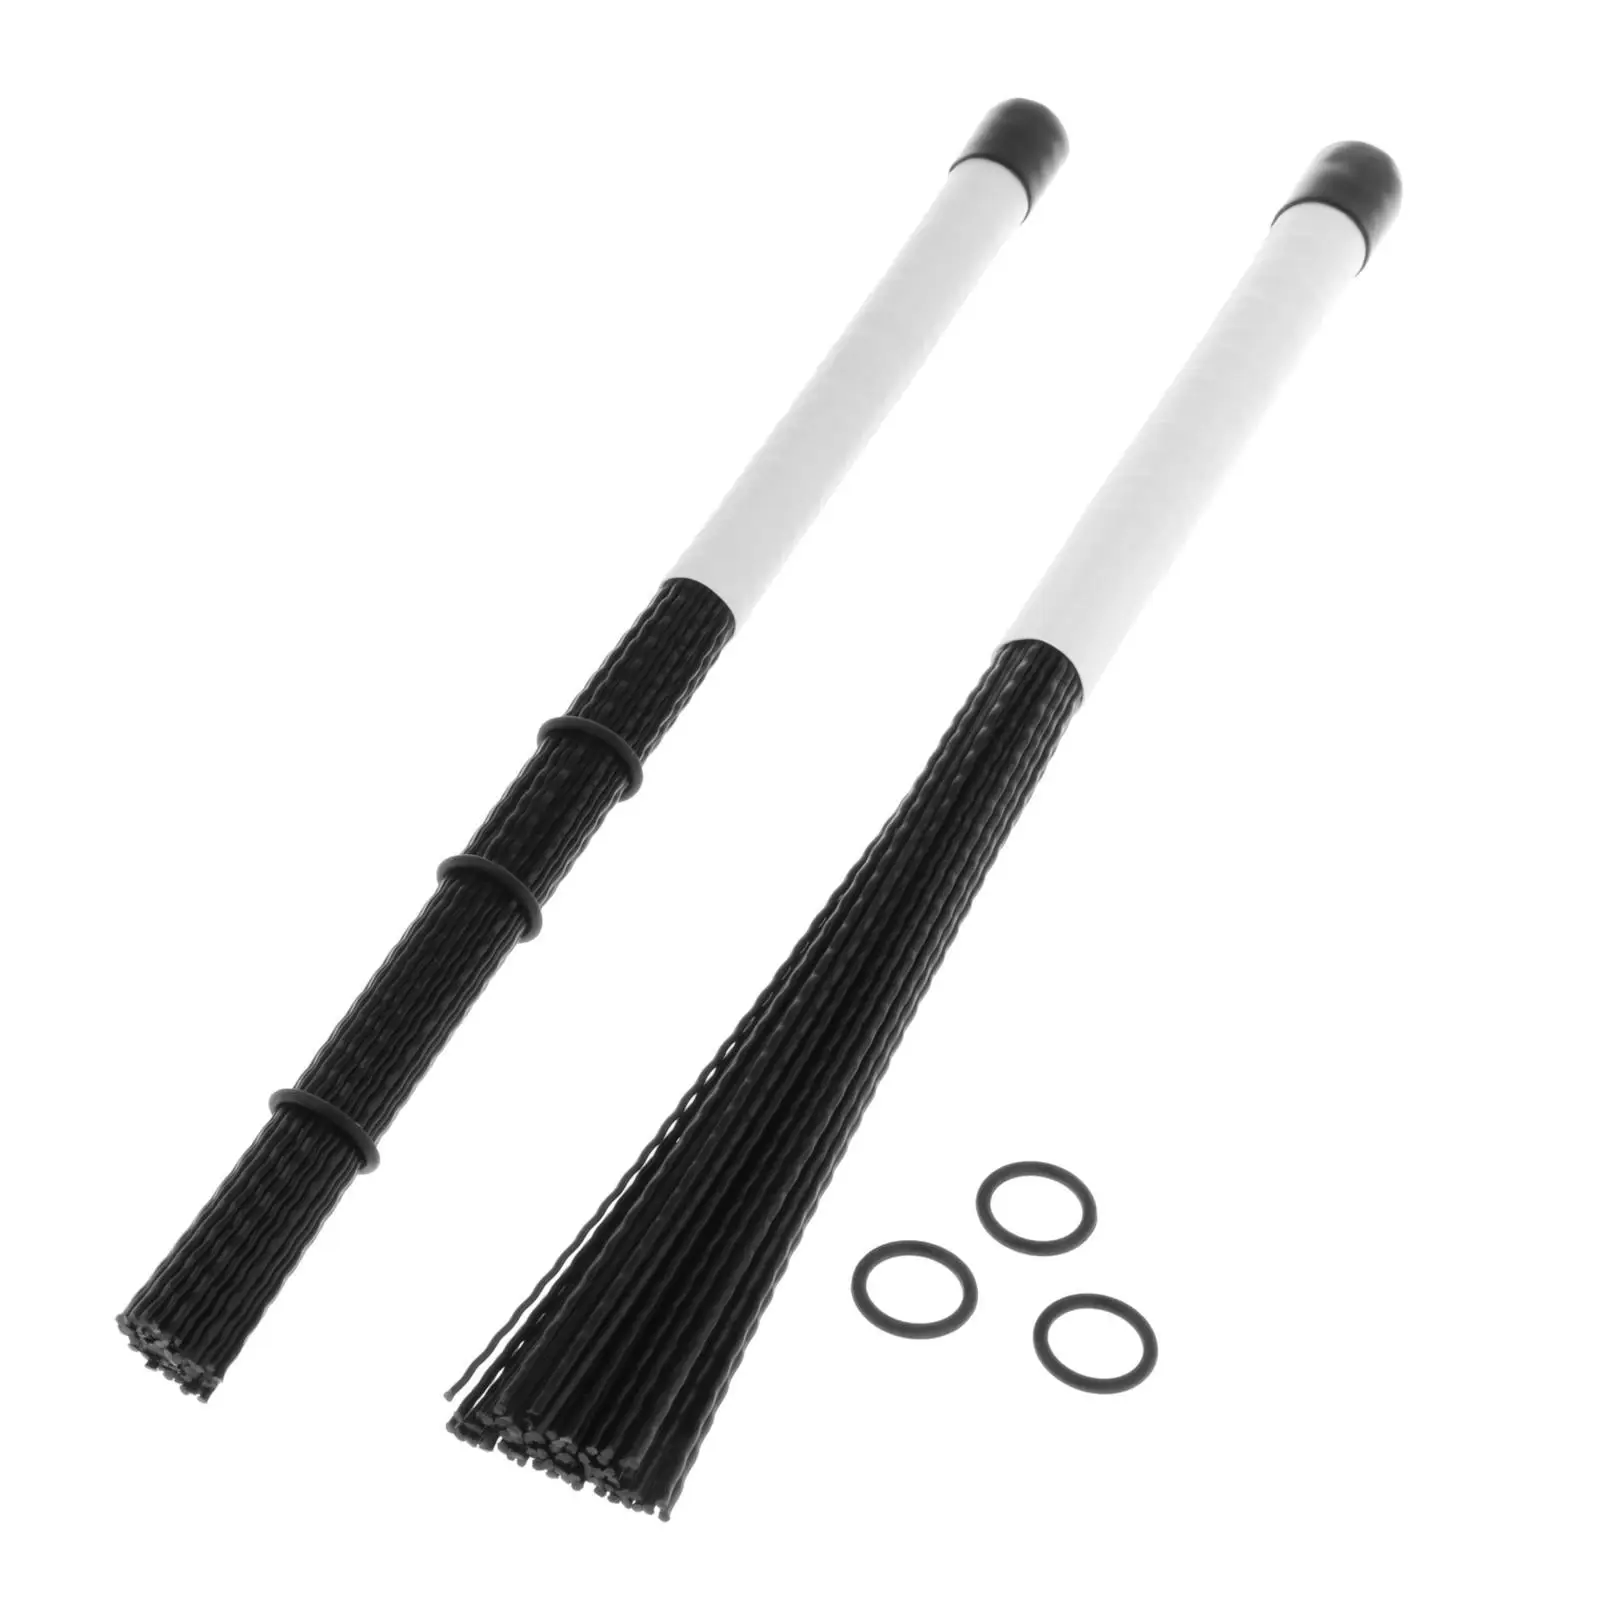 Retractable Drum Brush Percussion Musical Instrument Accessories Nylon Husk Brush for Folk Rock Band Drum Jazz Country Music